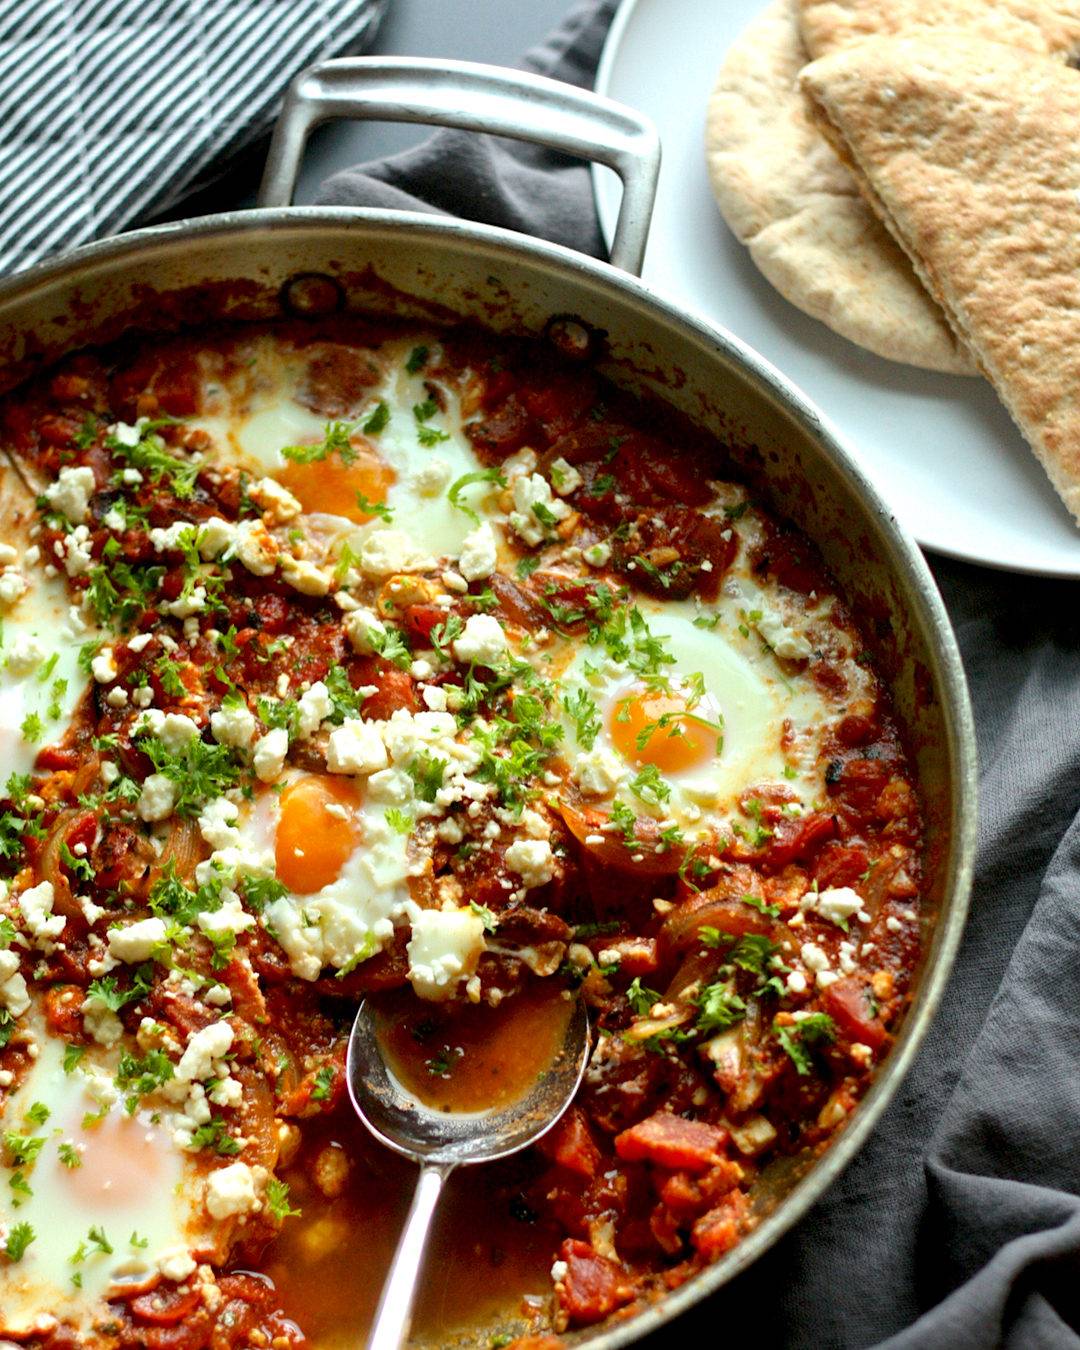 Skillet with Roasted Pepper Shakshuka and Toasted Pita Bread